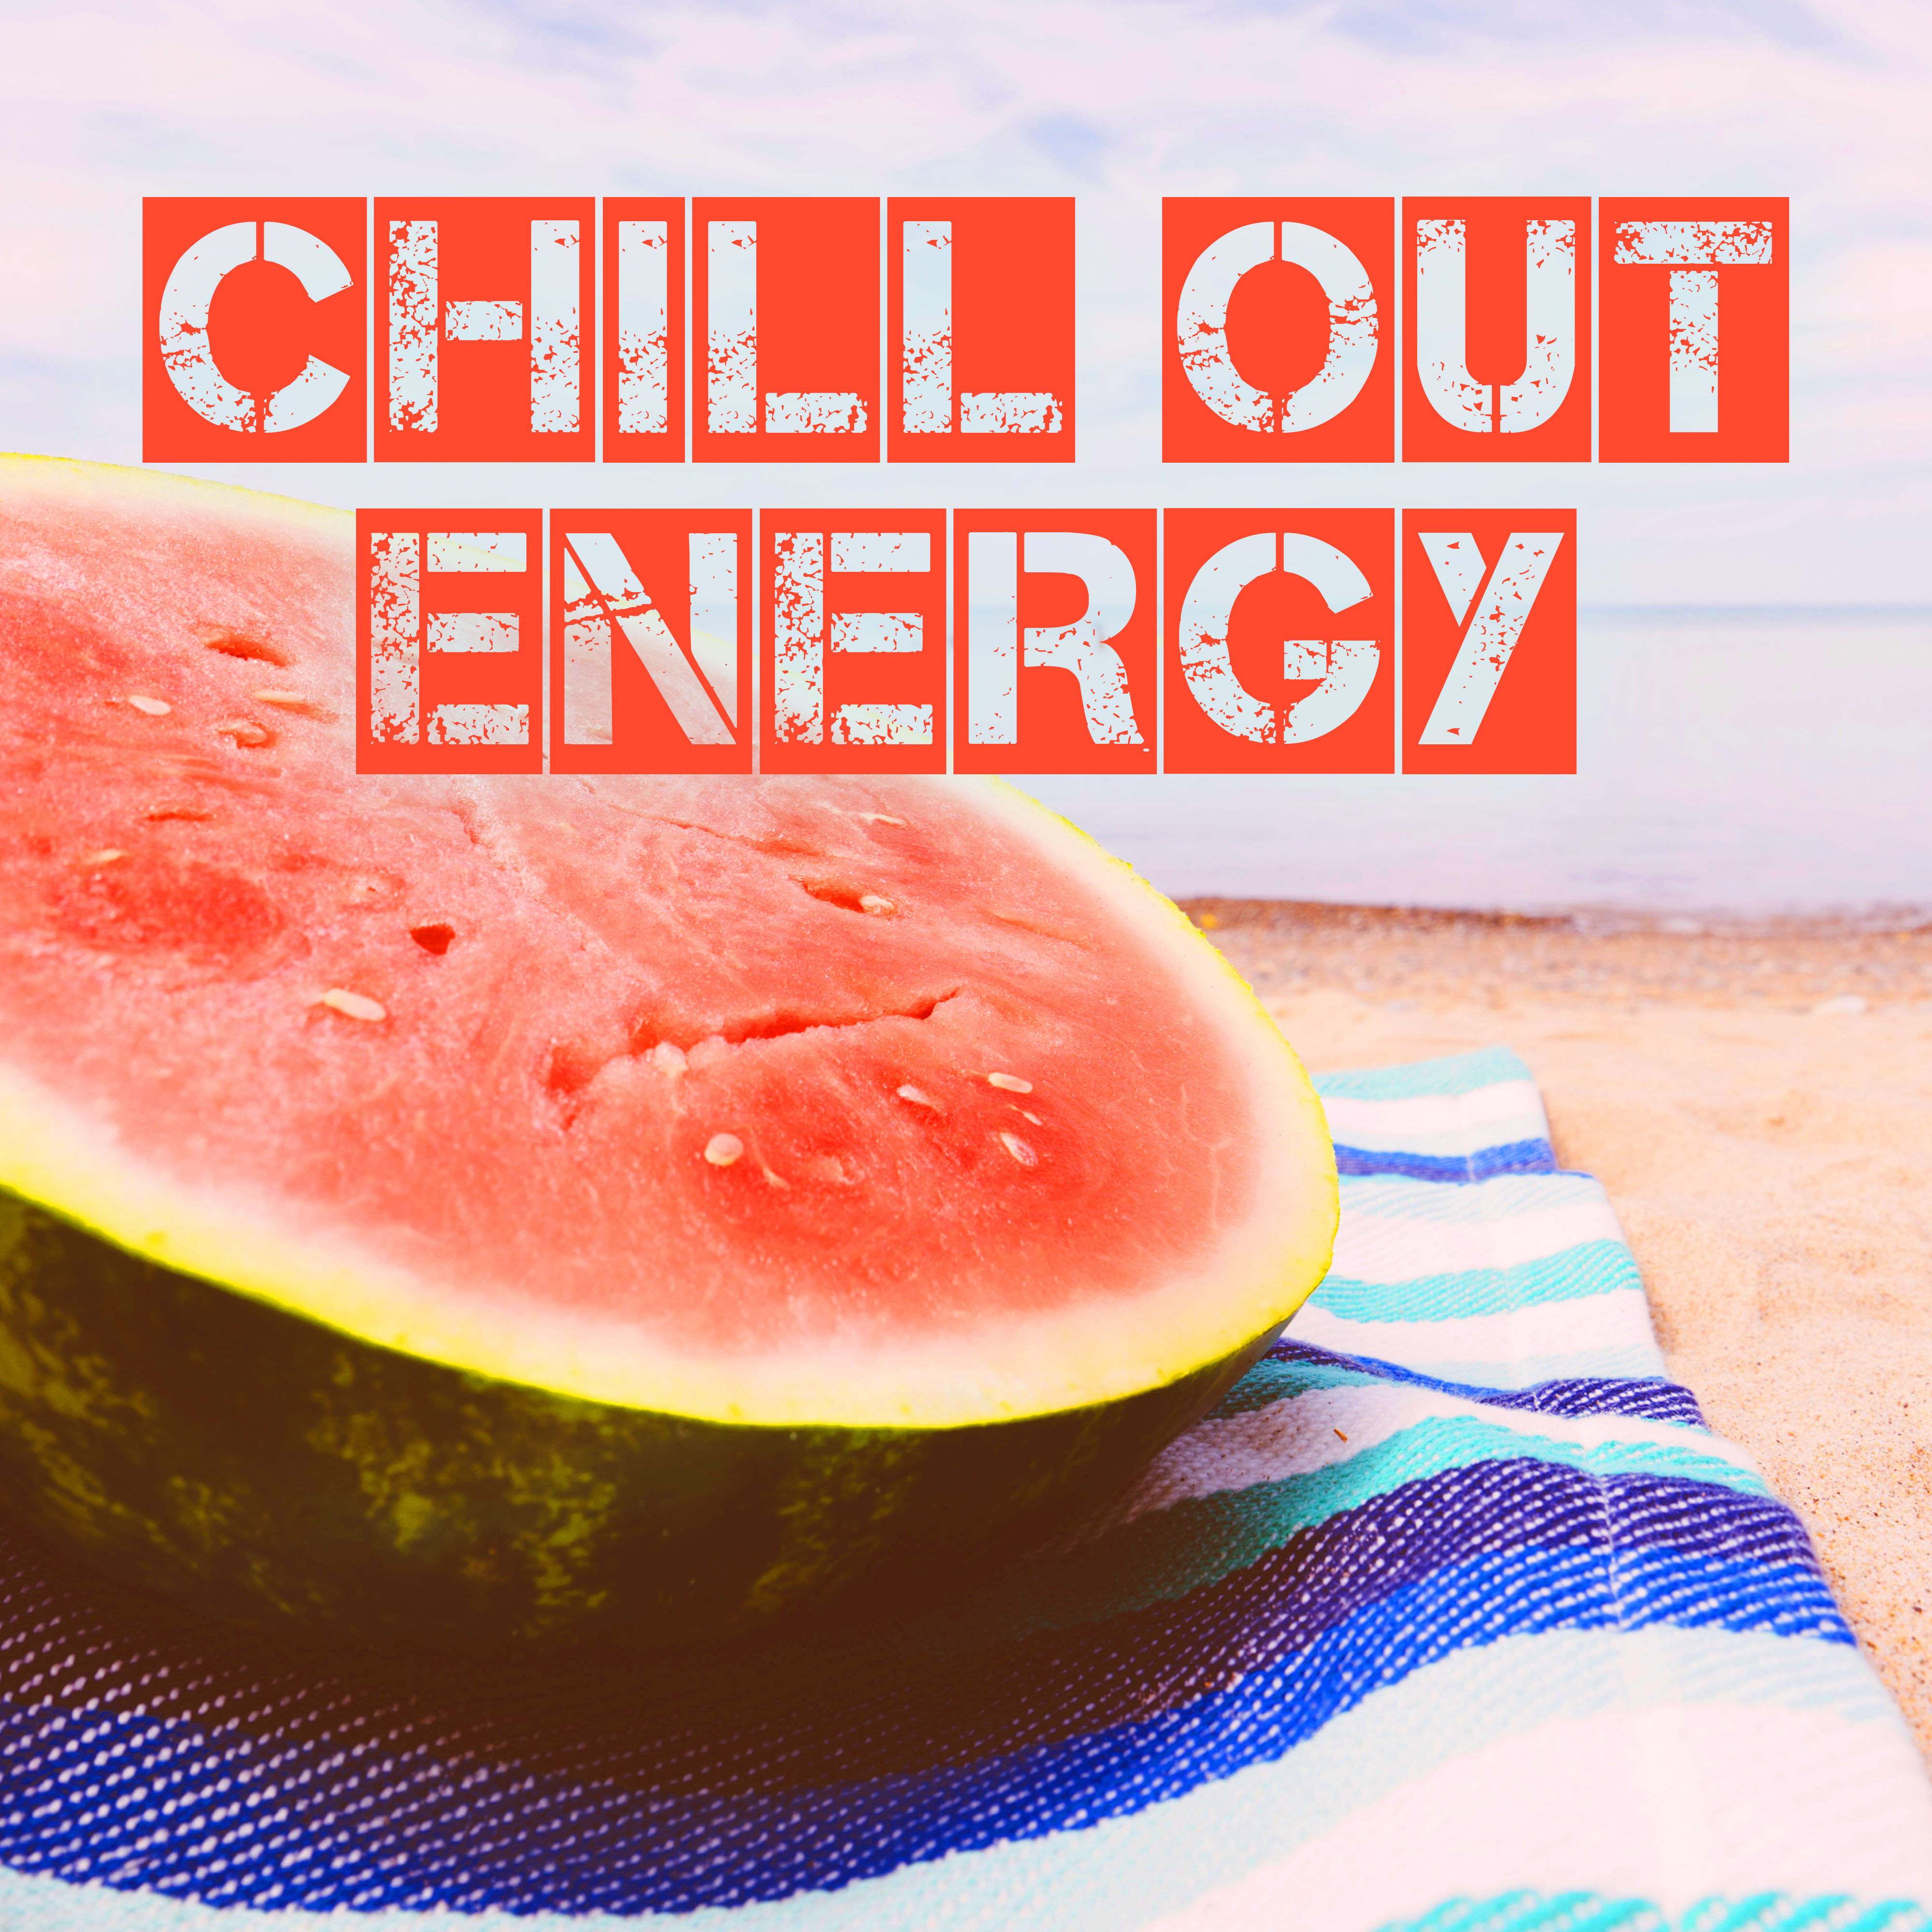 Chill Out Energy  Party Chill Out Songs, Ibiza 2017, Summer Fun, Holiday Party